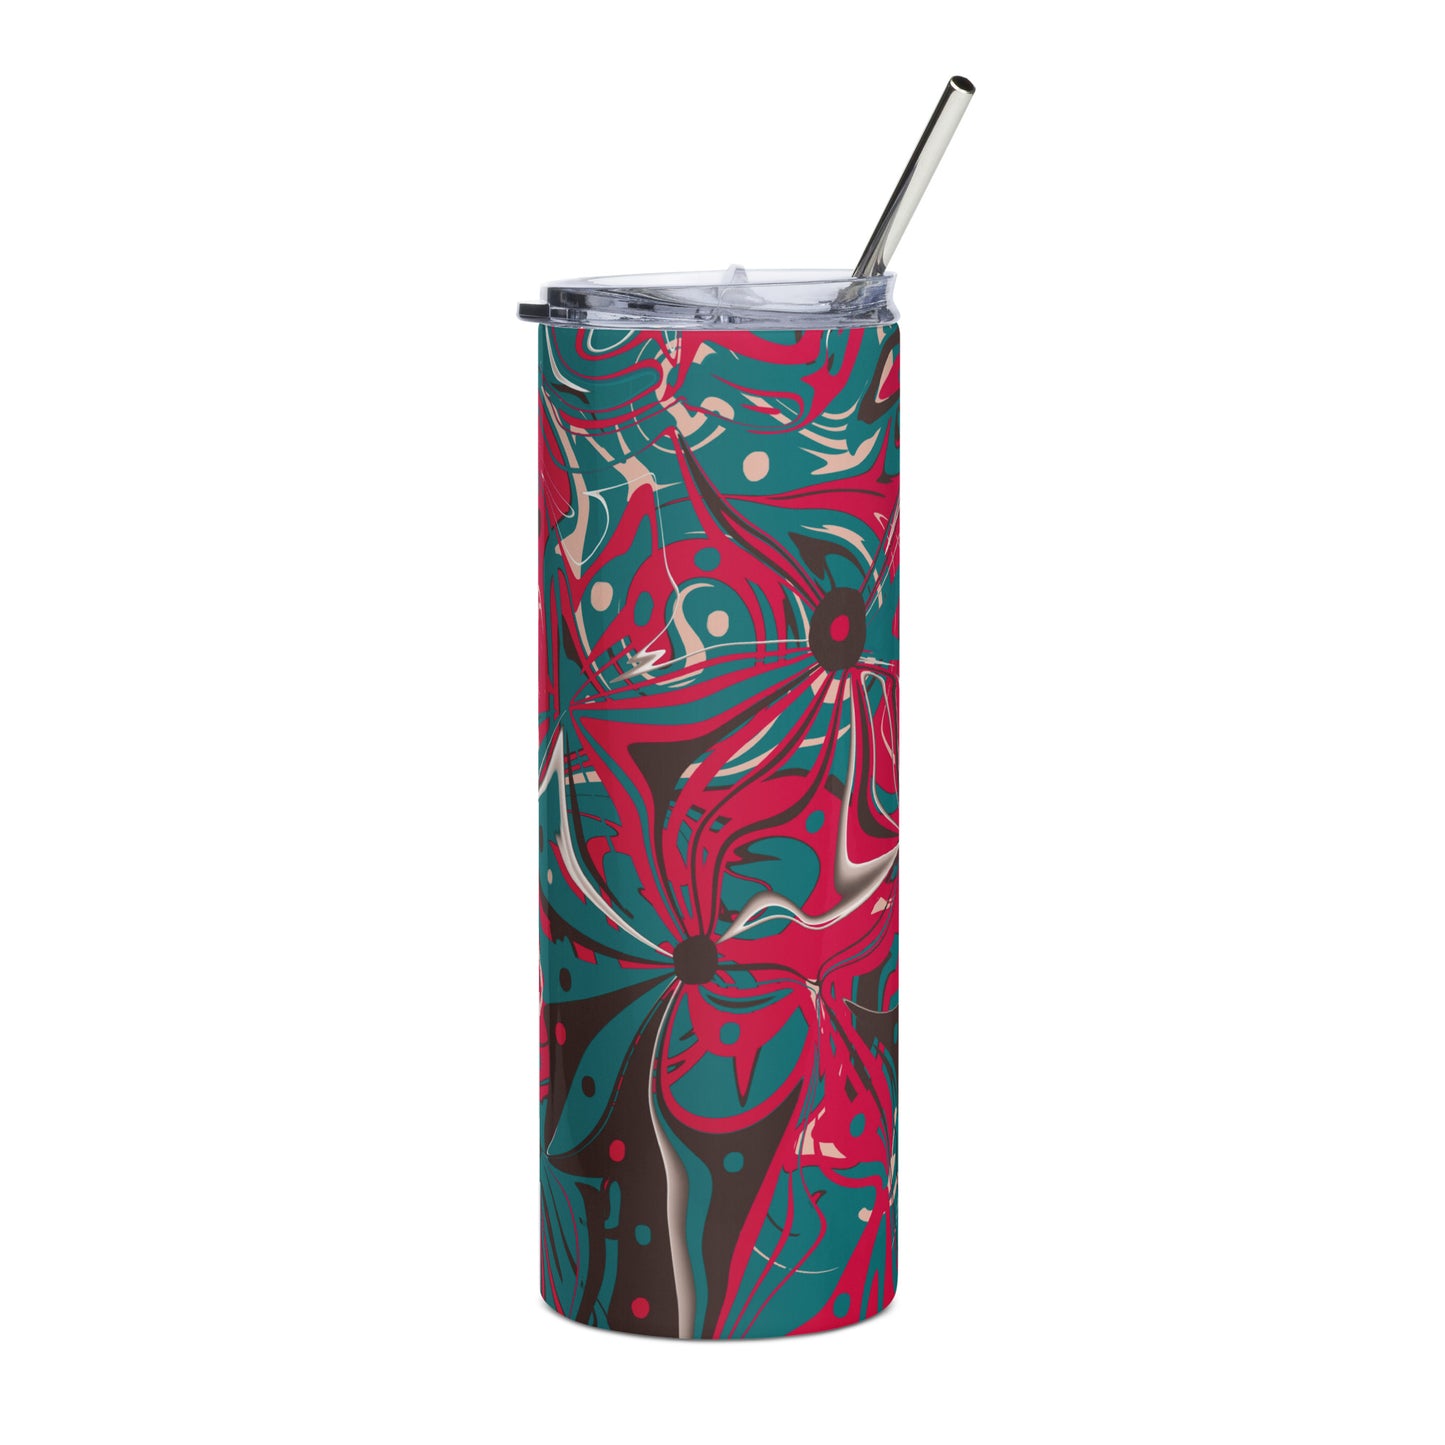 Spangled Stainless steel tumbler by Emmy Spoon